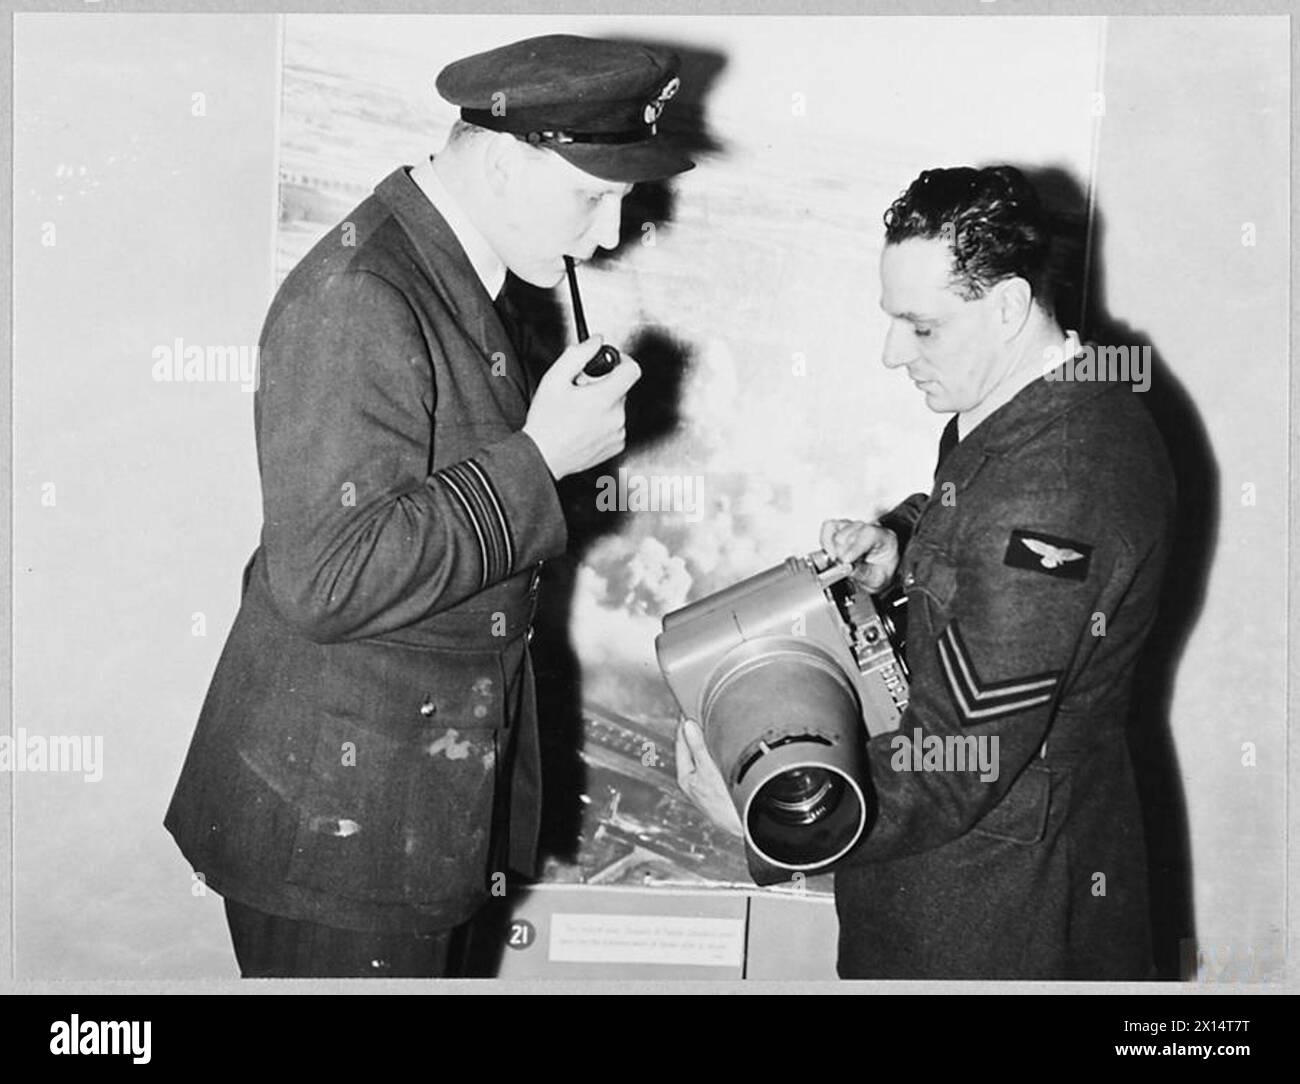 'CAMERA HAS WINGS' : R.A.F. EXHIBITION AT HARRODS - Picture taken at an exhibition of R.A.F.photographs on view at Harrods, Brompton Road, S.W.1. Picture (issued 1944) shows - Corporal A.C. Collingwood, an R.A.F. photographer, explaining modifications on an aerial camera to Squadron Leader R.A.B. Learoyd, VC Royal Air Force Stock Photo